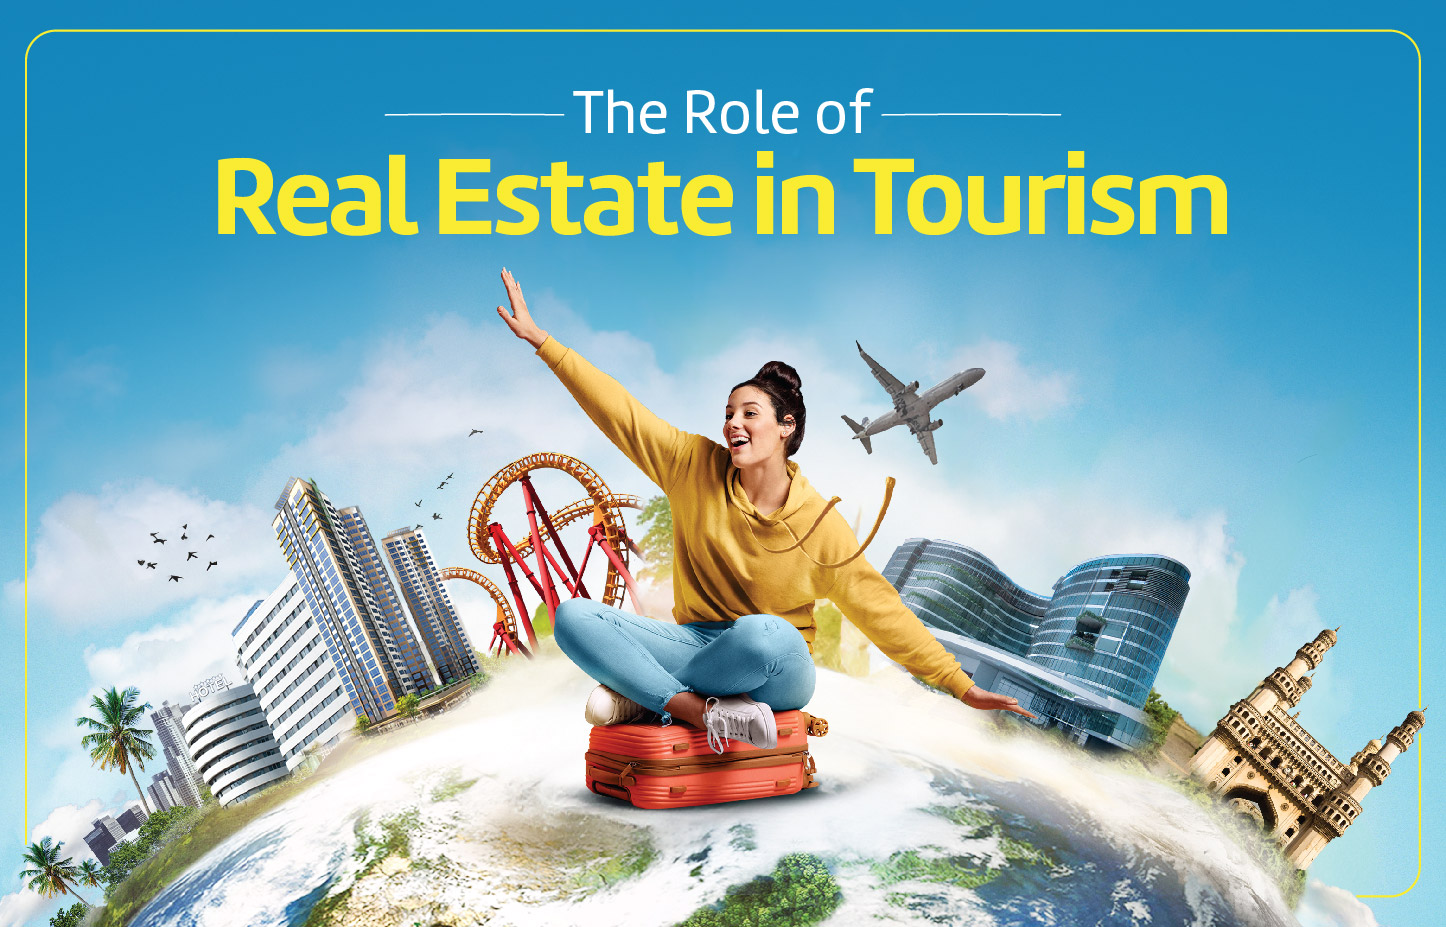 The Role of Real Estate in Tourism